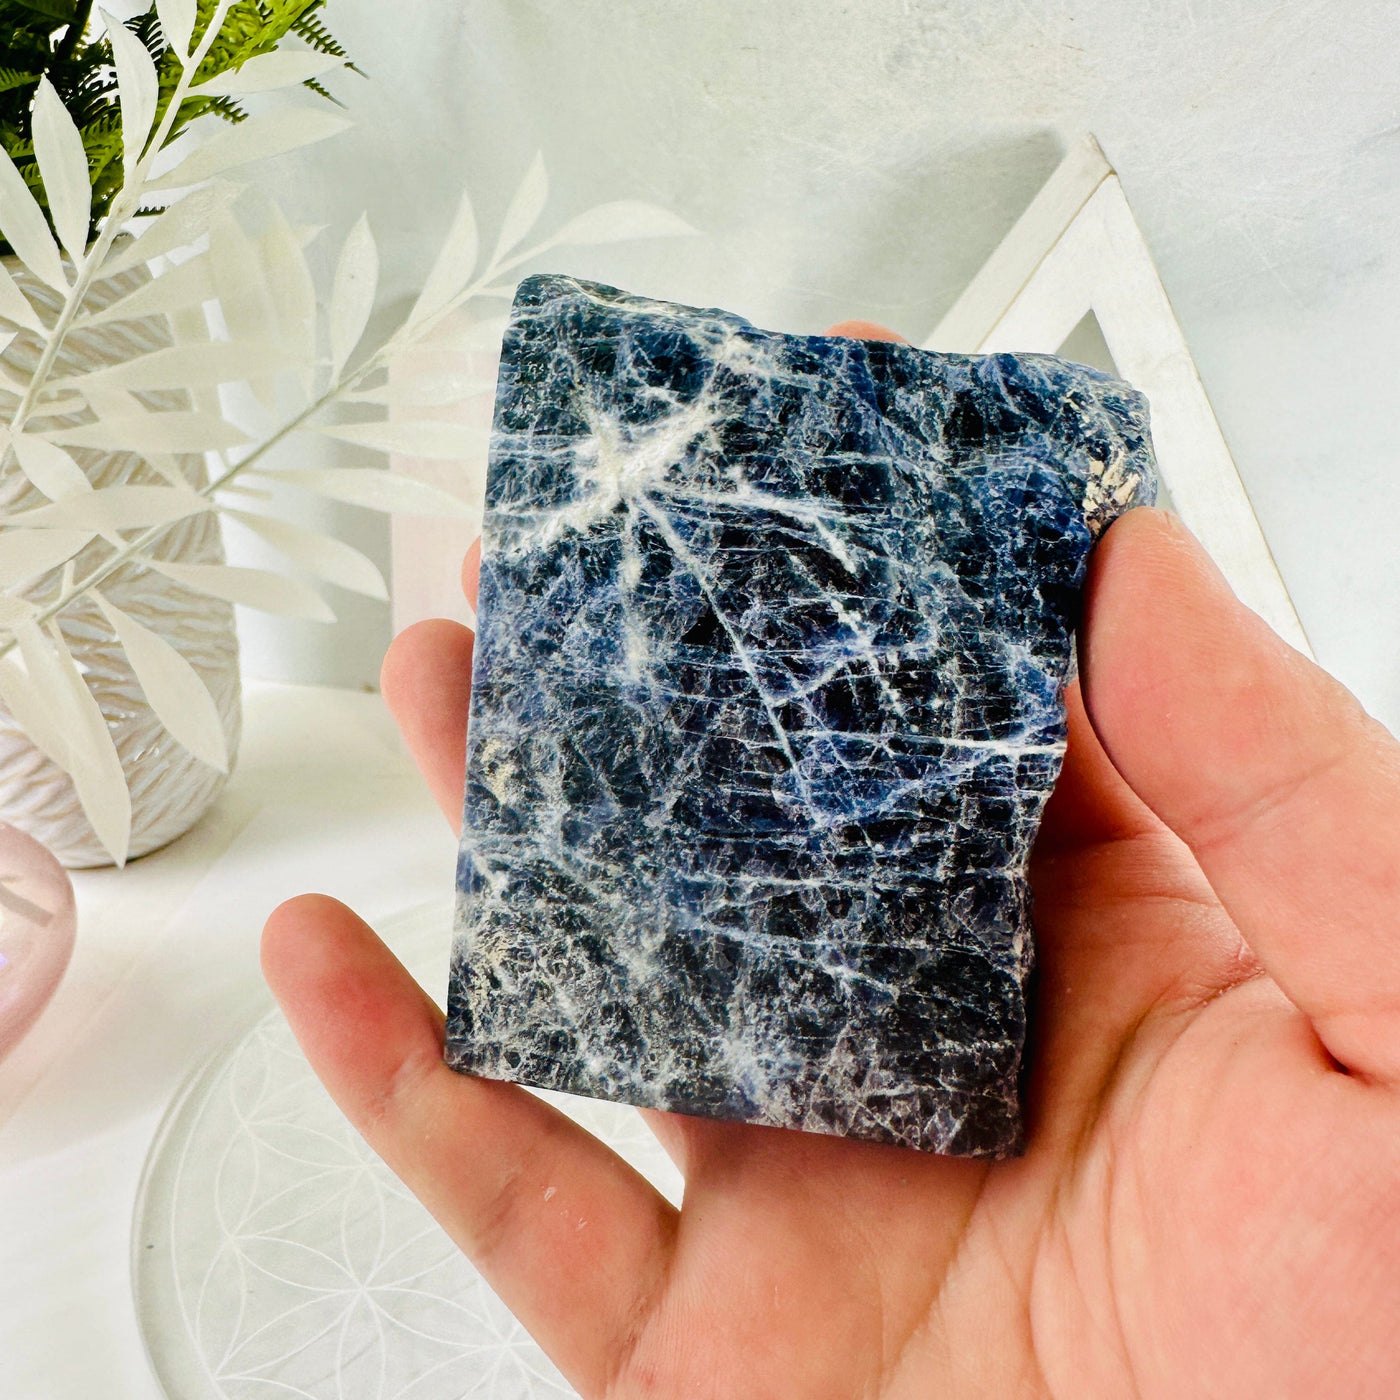  Sodalite Chunk - Rough Crystal in hand for size reference